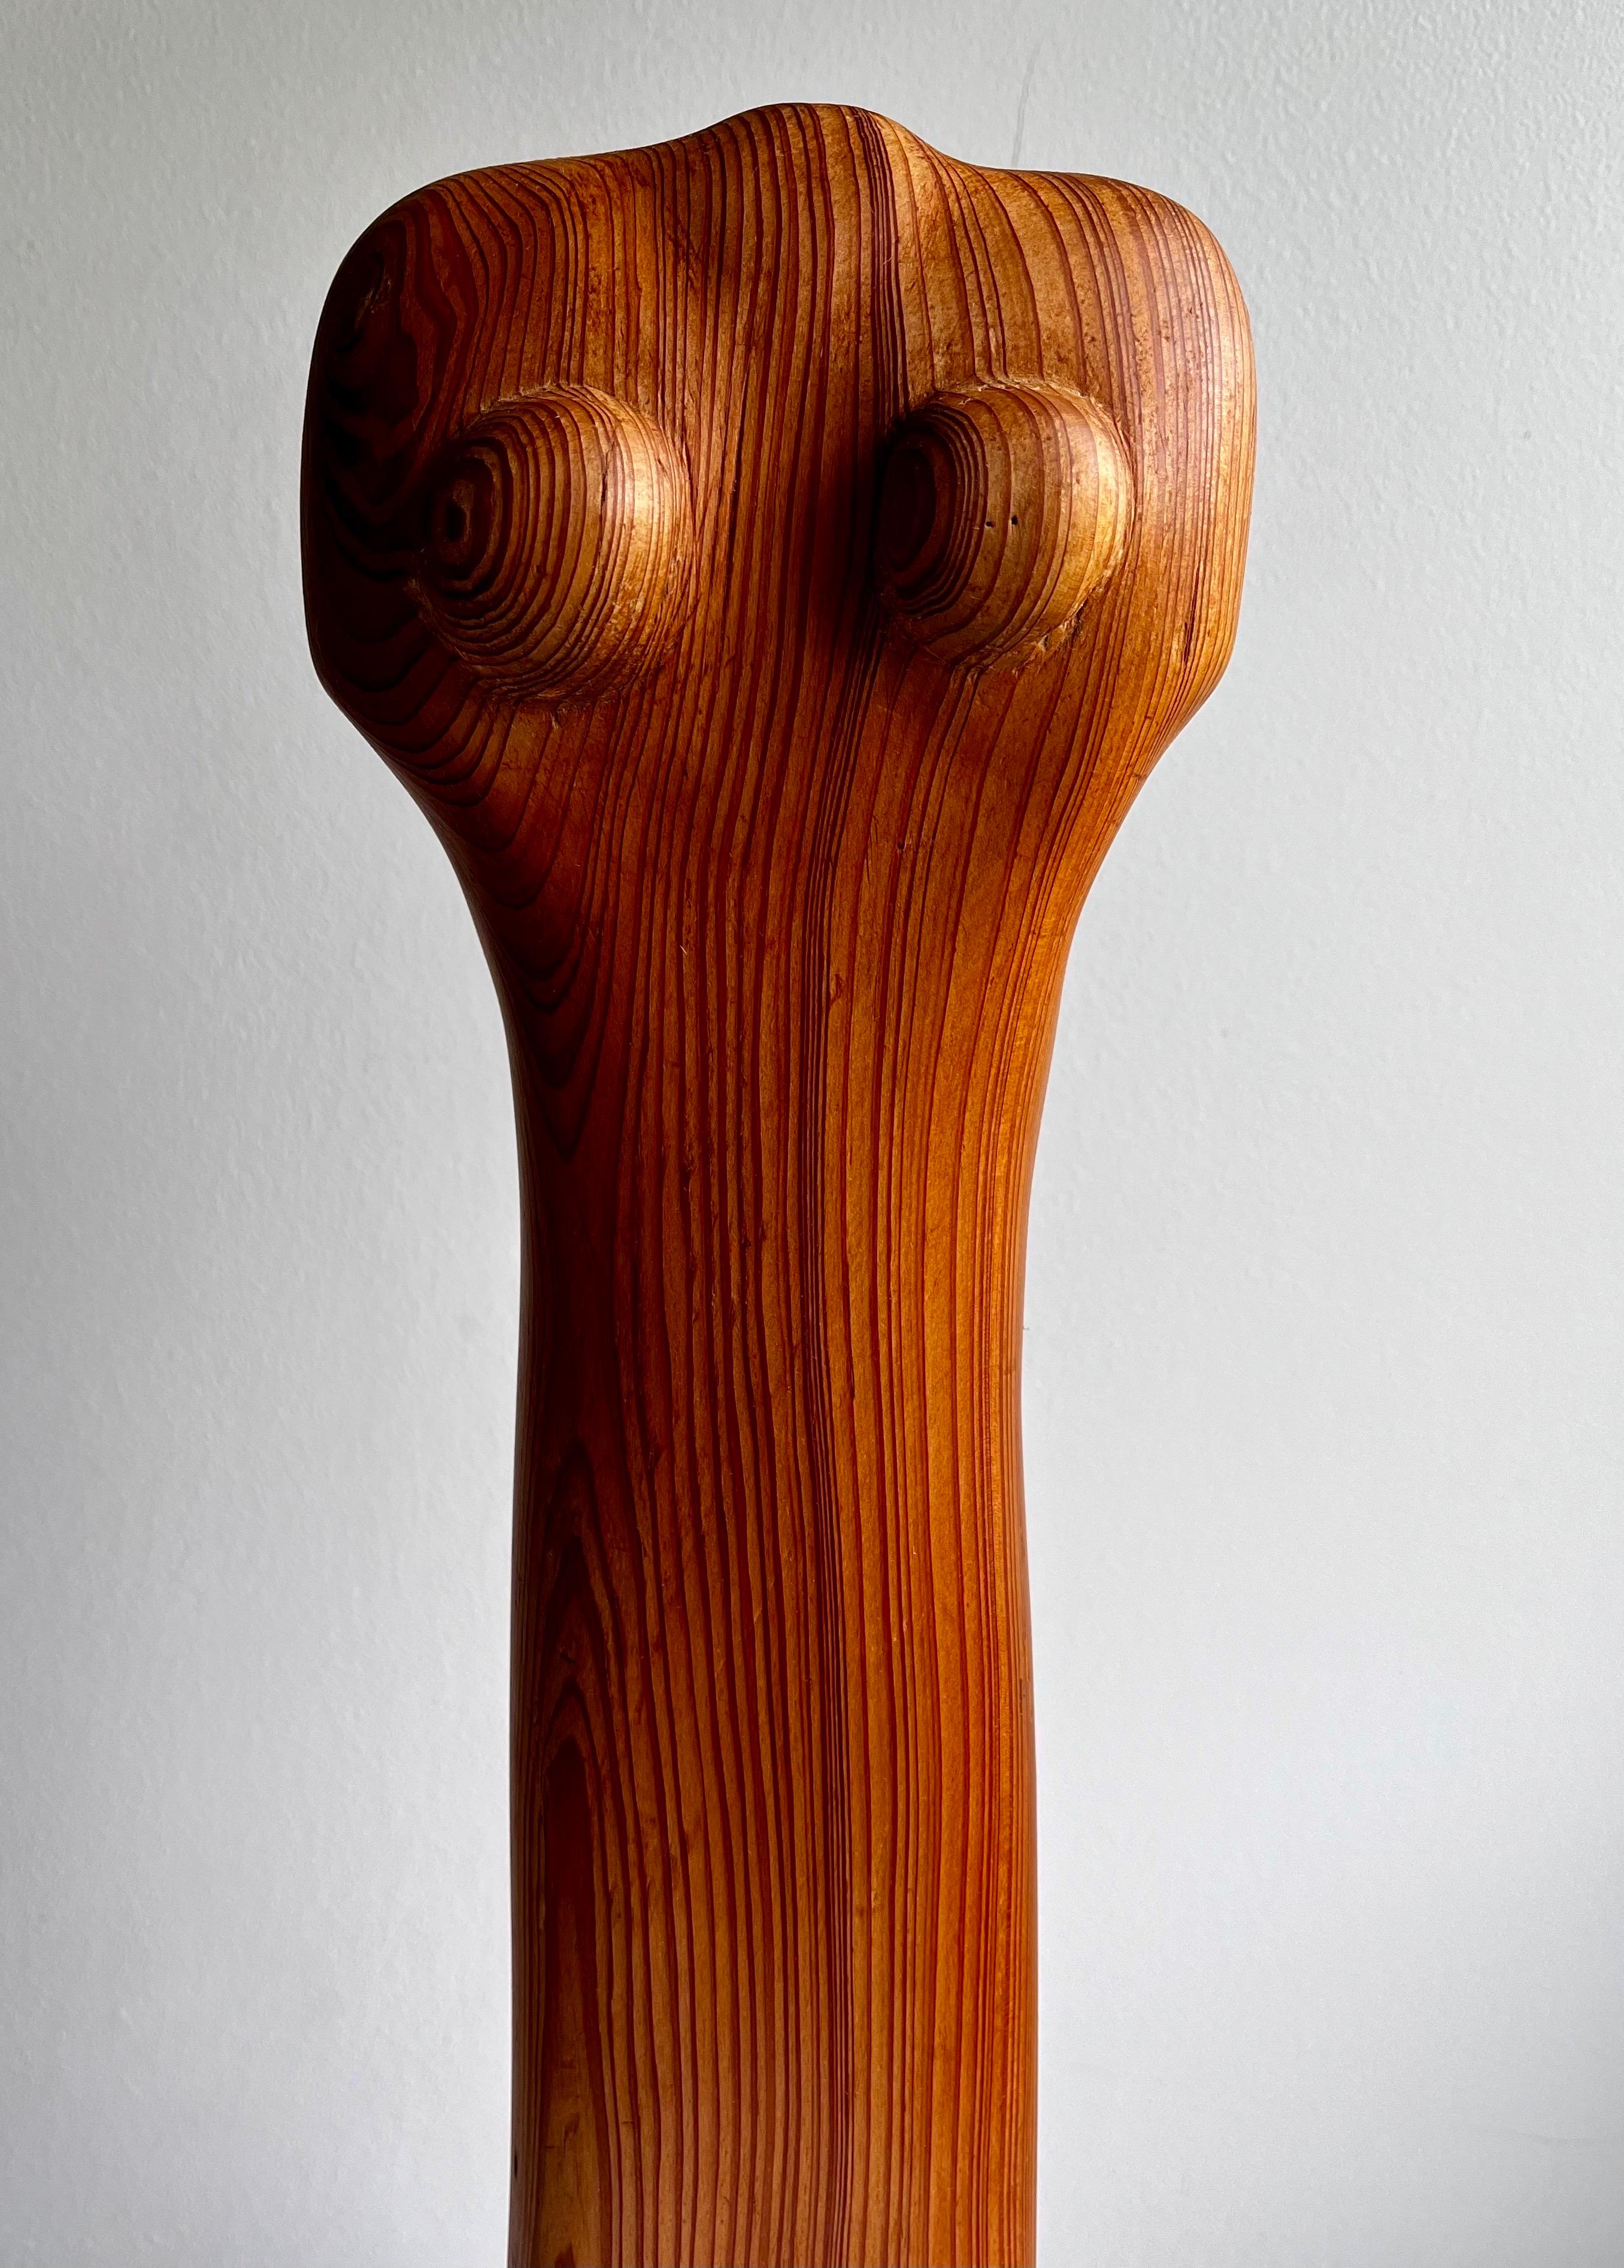 Primitive Modernist Wood Sculpture of Female Nude In Good Condition For Sale In Philadelphia, PA